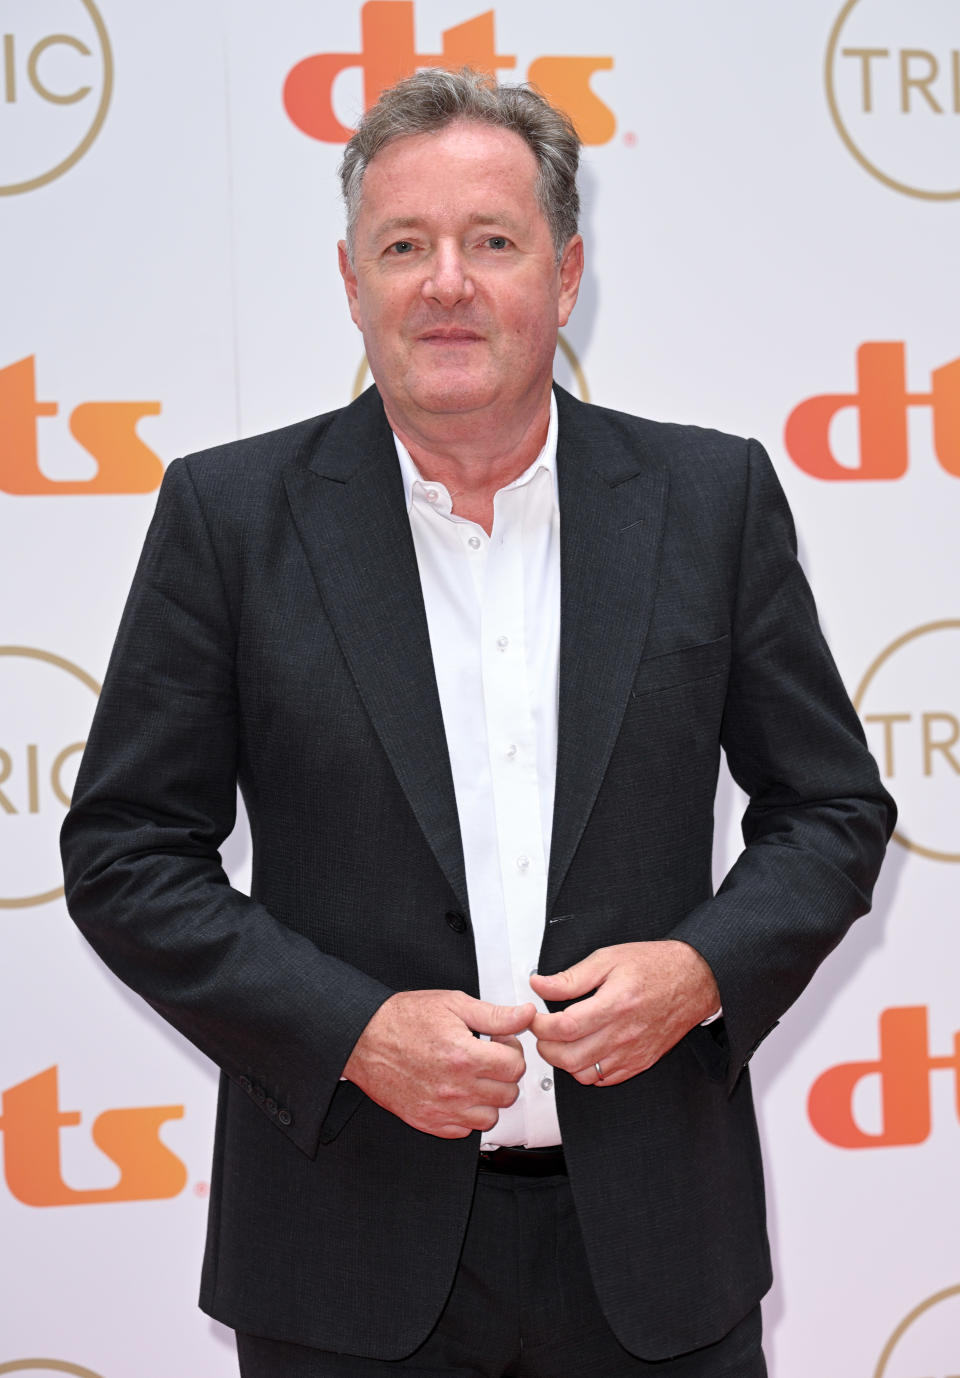 LONDON, ENGLAND - SEPTEMBER 15: Piers Morgan attends The TRIC Awards 2021 at 8 Northumberland Avenue on September 15, 2021 in London, England. (Photo by Karwai Tang/WireImage)